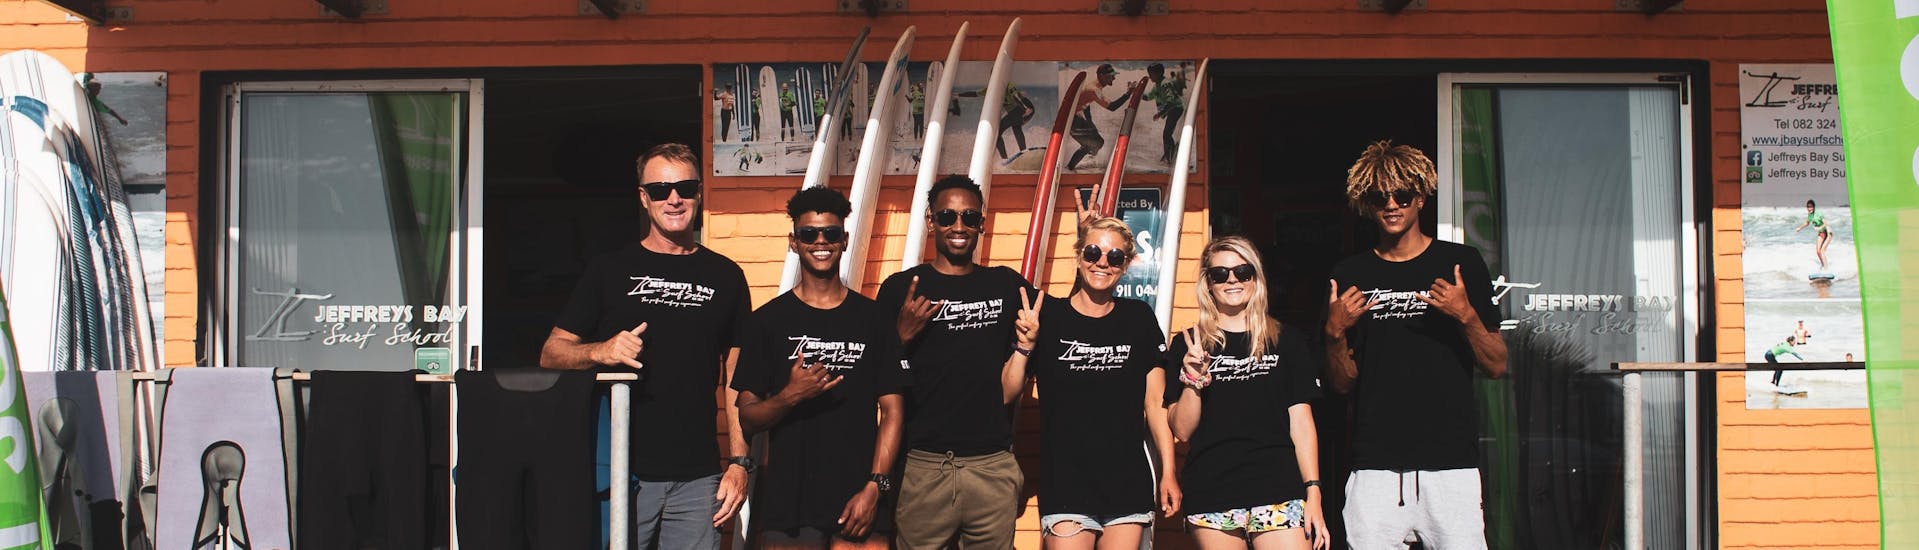 The team of Jeffreys Bay Surf School smiling posing for a picture at their base in Jeffreys Bay on the beach where they held surfing lessons, both groups and private.